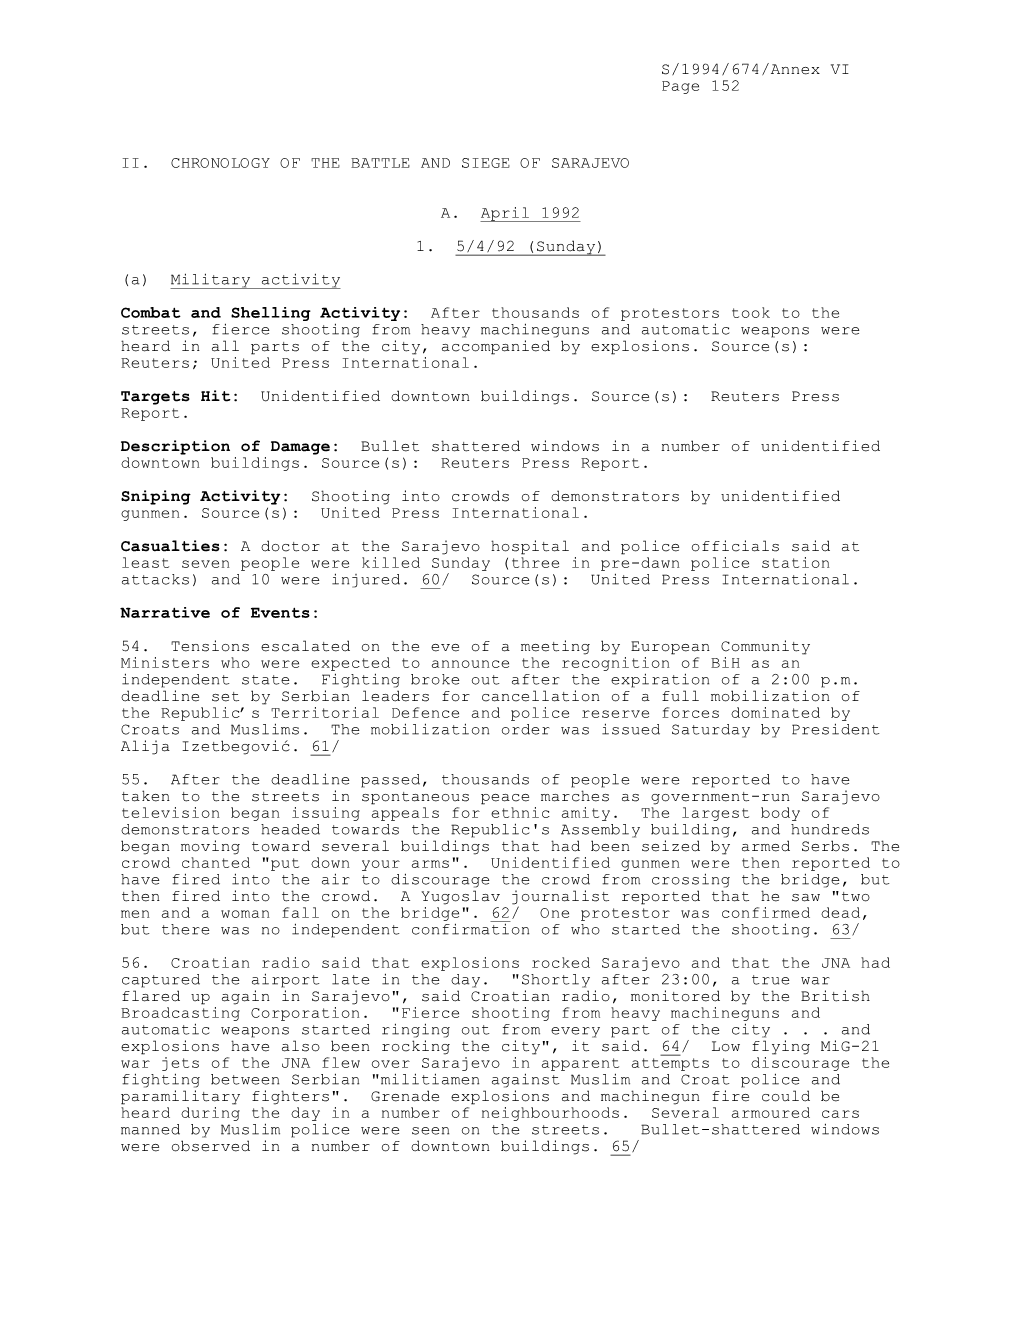 S/1994/674/Annex VI Page 152 II. CHRONOLOGY of the BATTLE